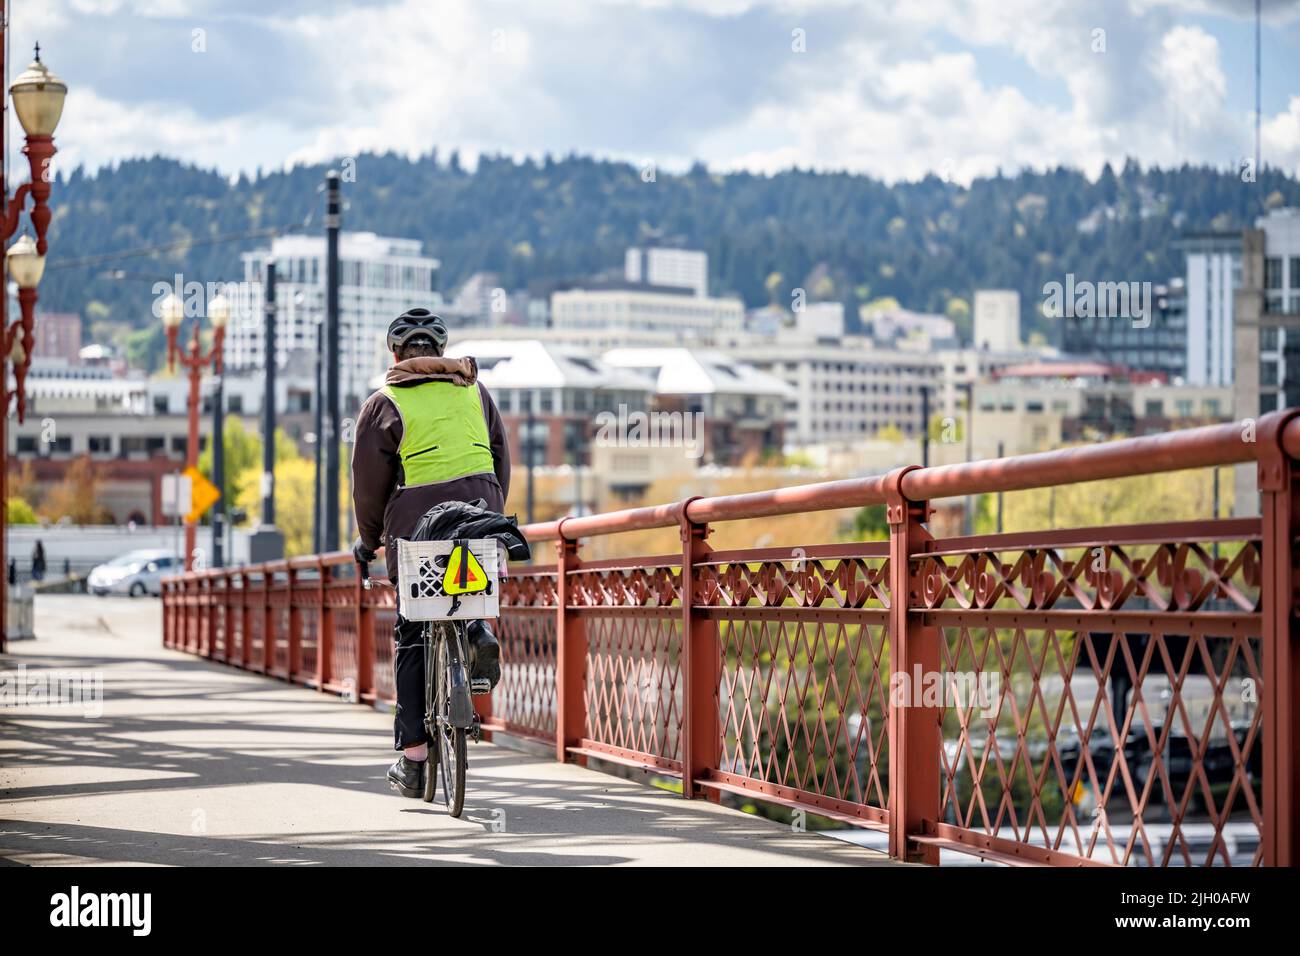 A man on a bike pedals a bicycle on a dedicated path for cyclists on the Broadway bridge preferring an active healthy lifestyle using cycling ride and Stock Photo